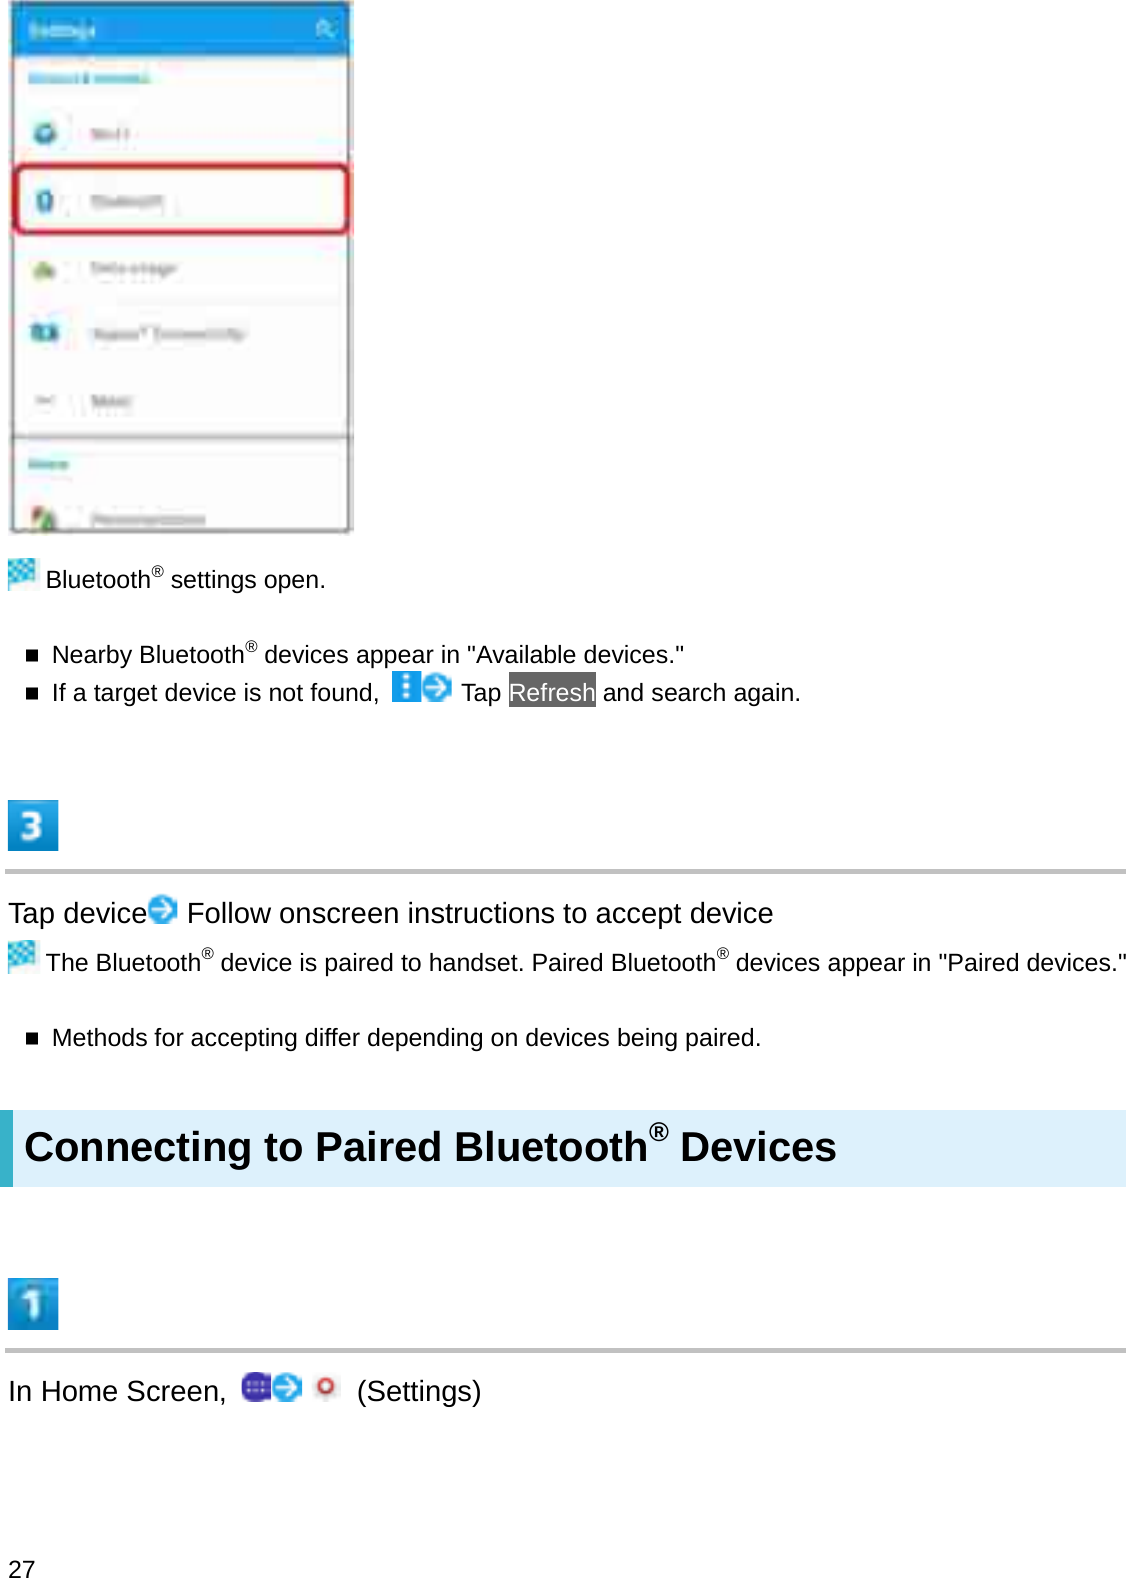 Bluetooth®settings open.Nearby Bluetooth®devices appear in &quot;Available devices.&quot;If a target device is not found,  Tap Refresh and search again.Tap device Follow onscreen instructions to accept deviceThe Bluetooth®device is paired to handset. Paired Bluetooth®devices appear in &quot;Paired devices.&quot;Methods for accepting differ depending on devices being paired.Connecting to Paired Bluetooth®DevicesIn Home Screen,  (Settings)27